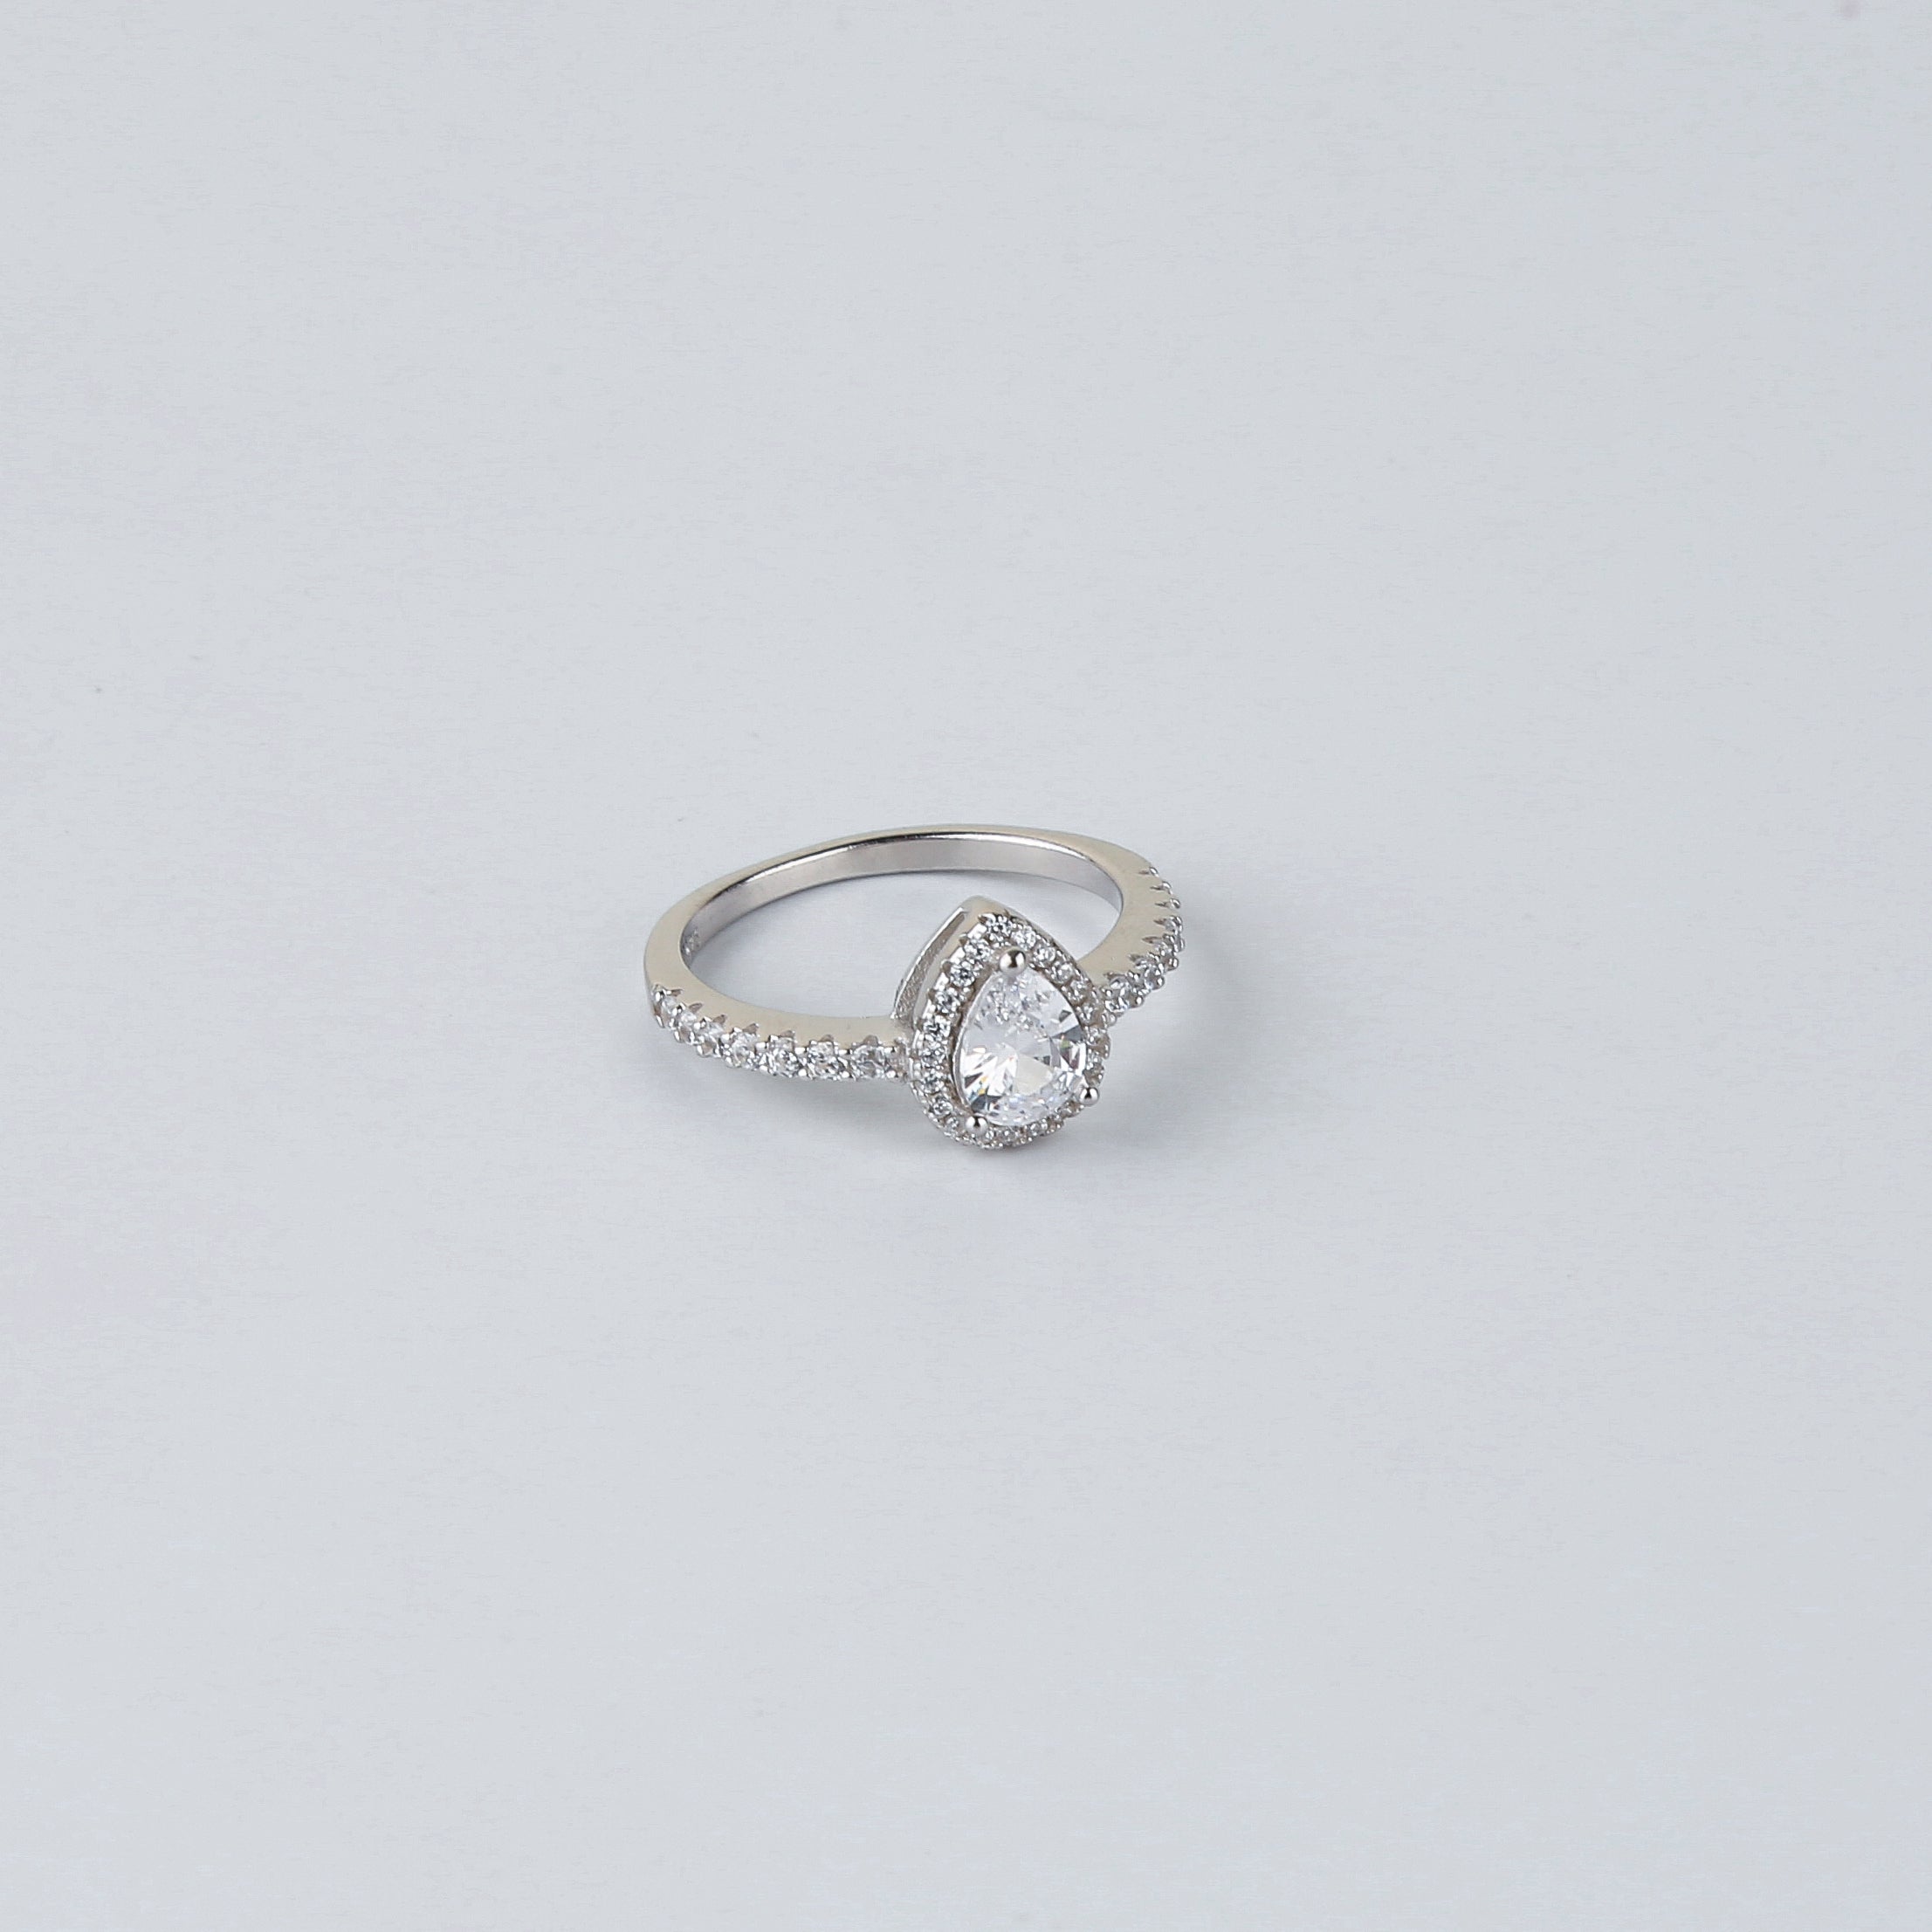 The Drop Shape Solitaire Ring